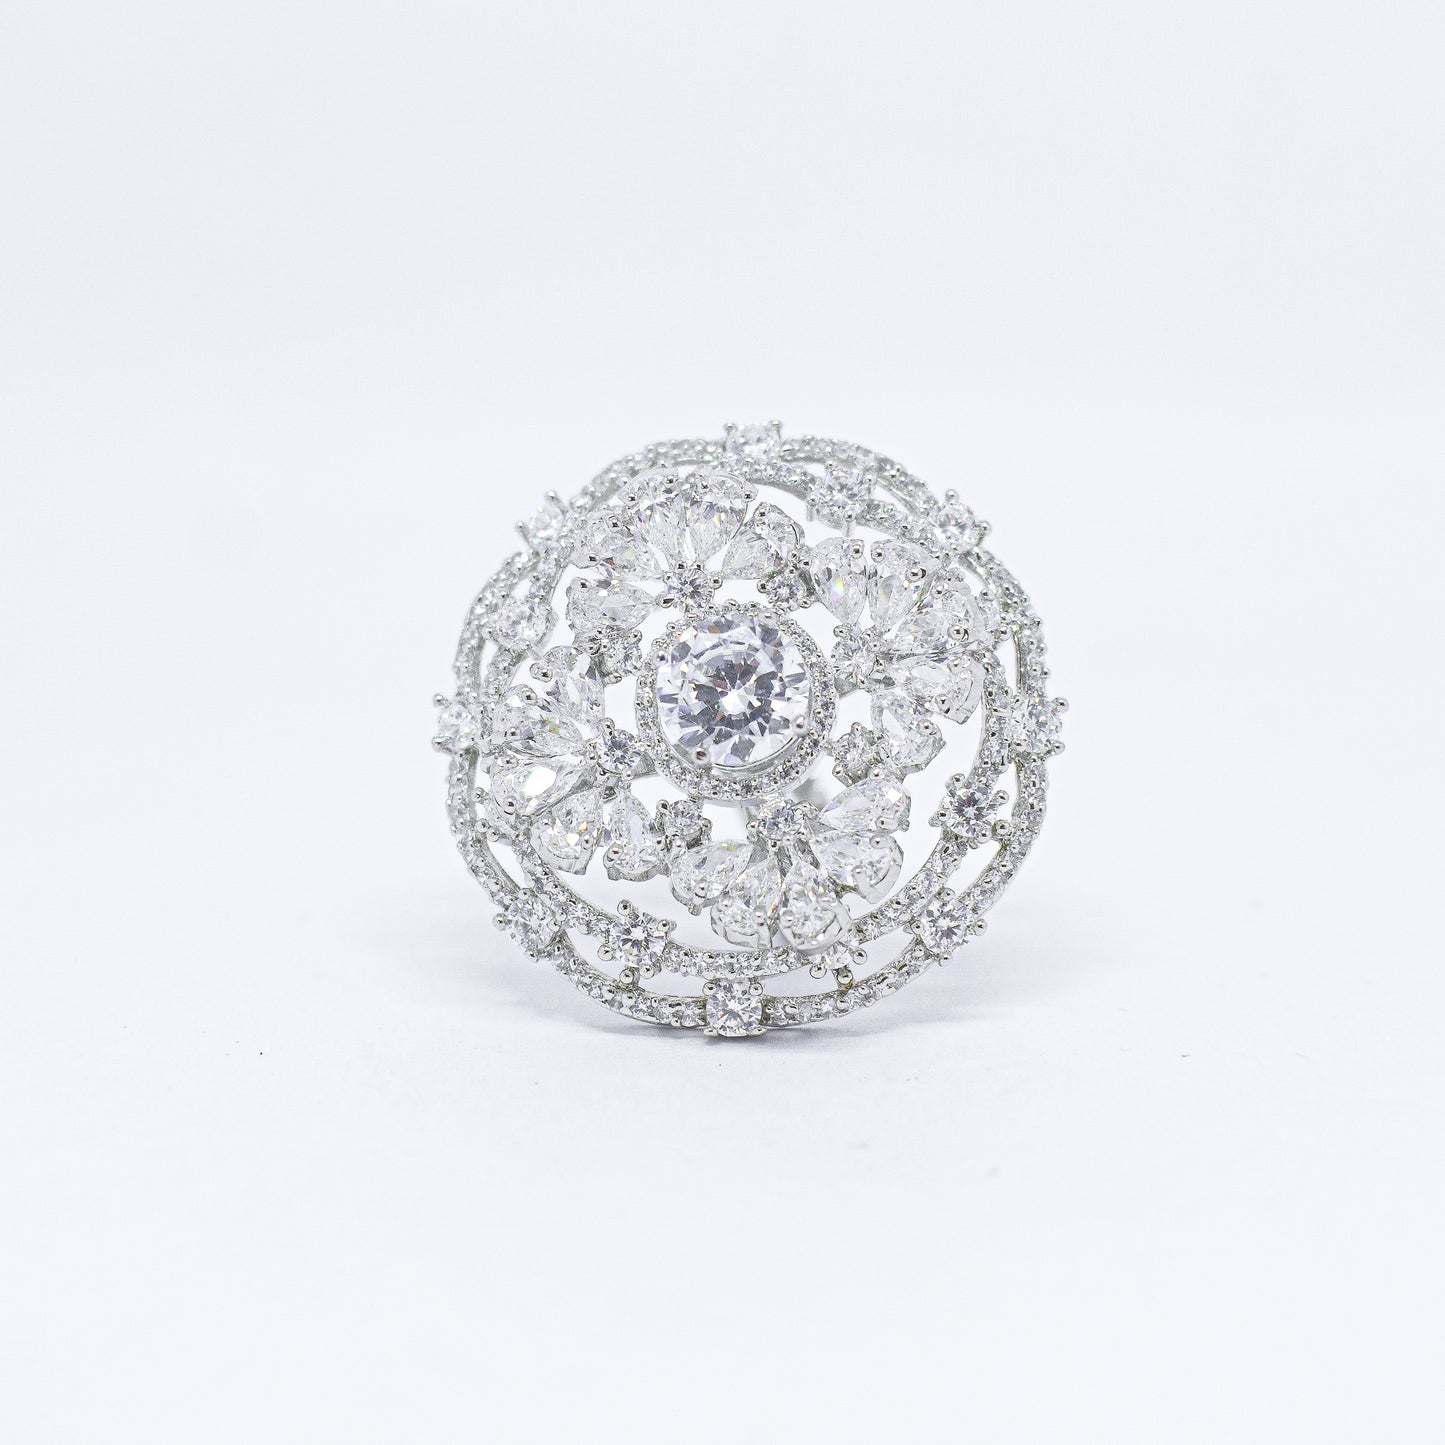 Candrin Orion Ring